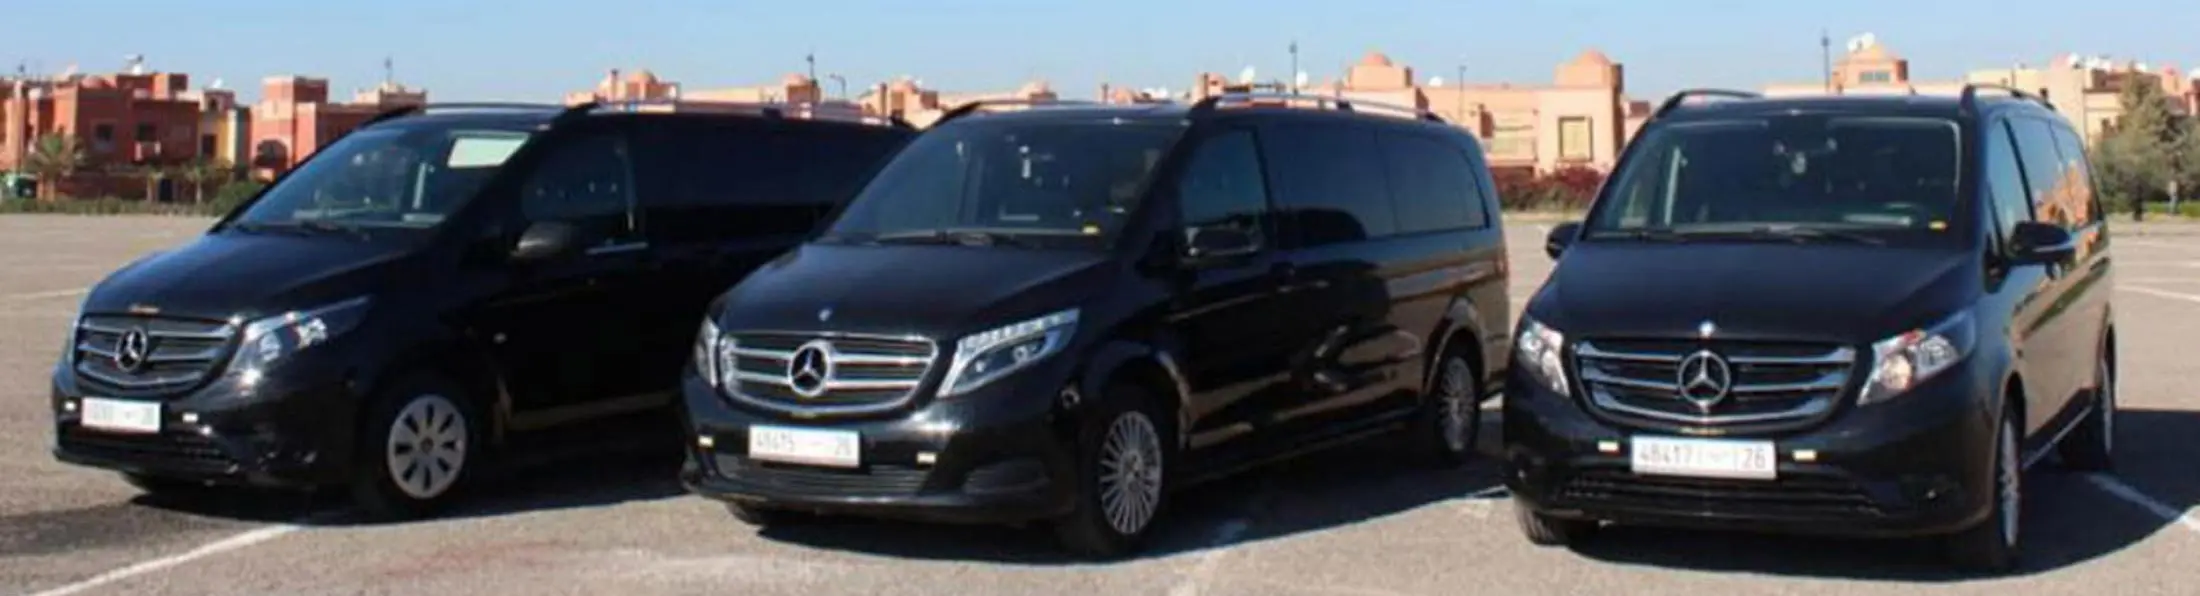 Morocco Airport Transfers Taxi & shuttles